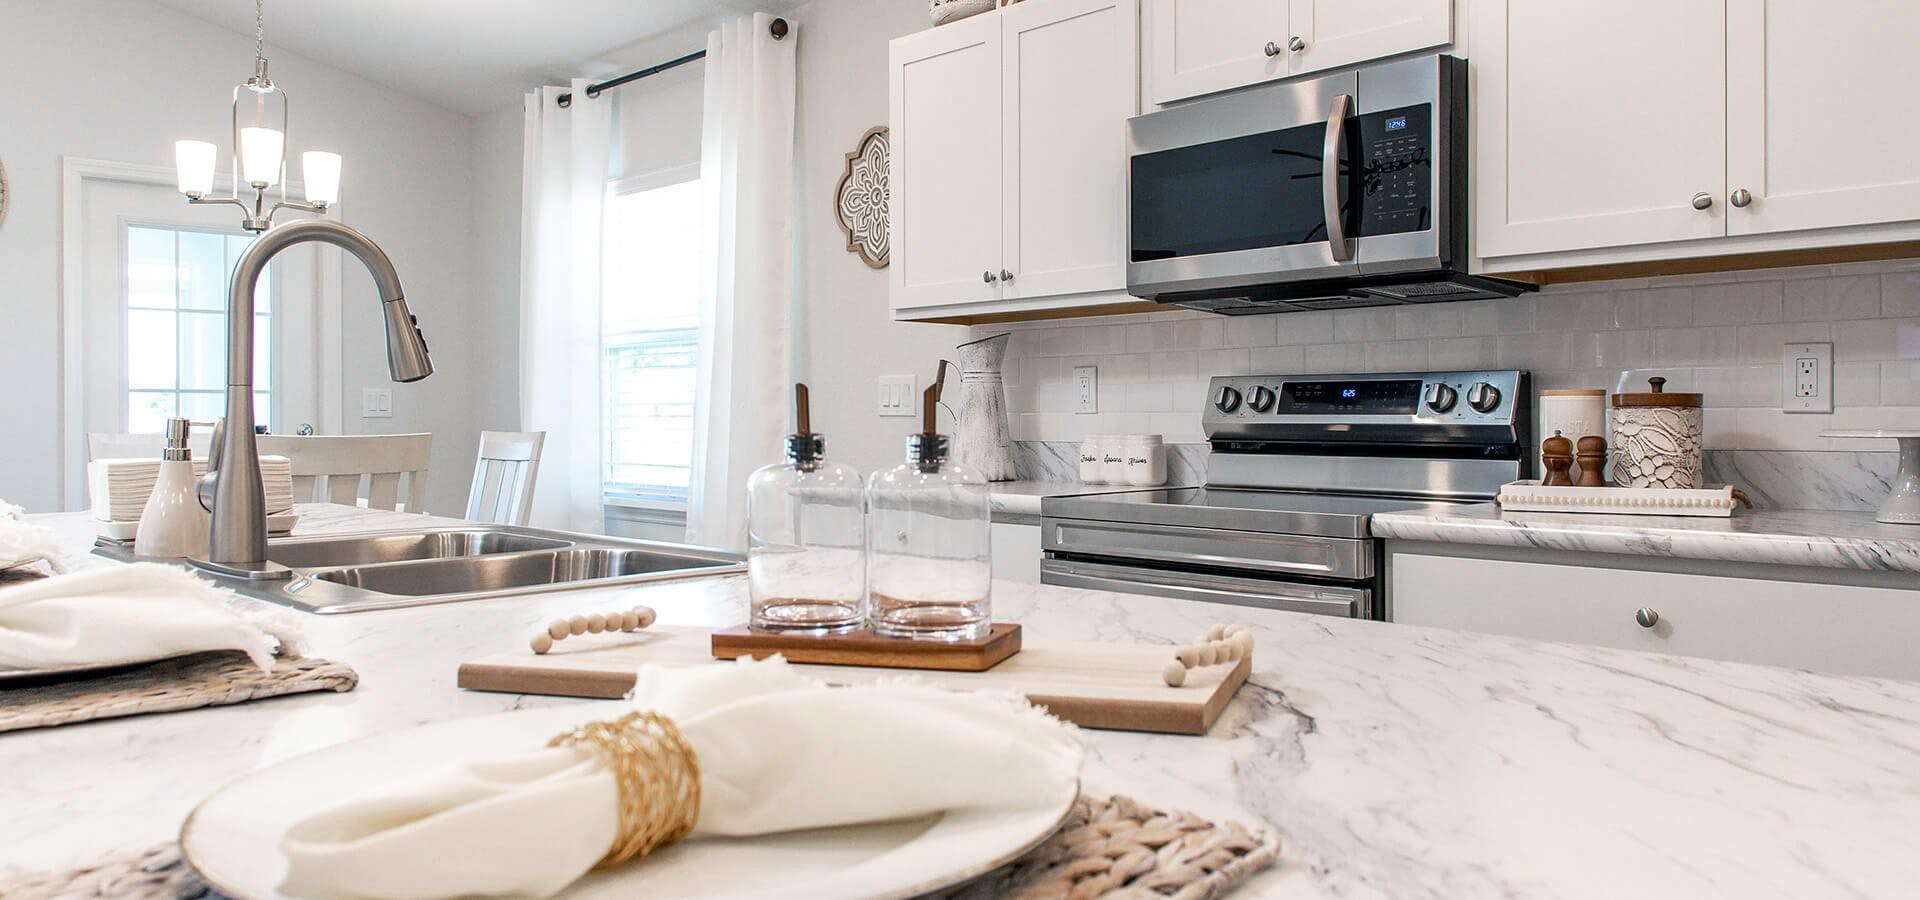 Clean white kitchen finishes in a Florida new construction home